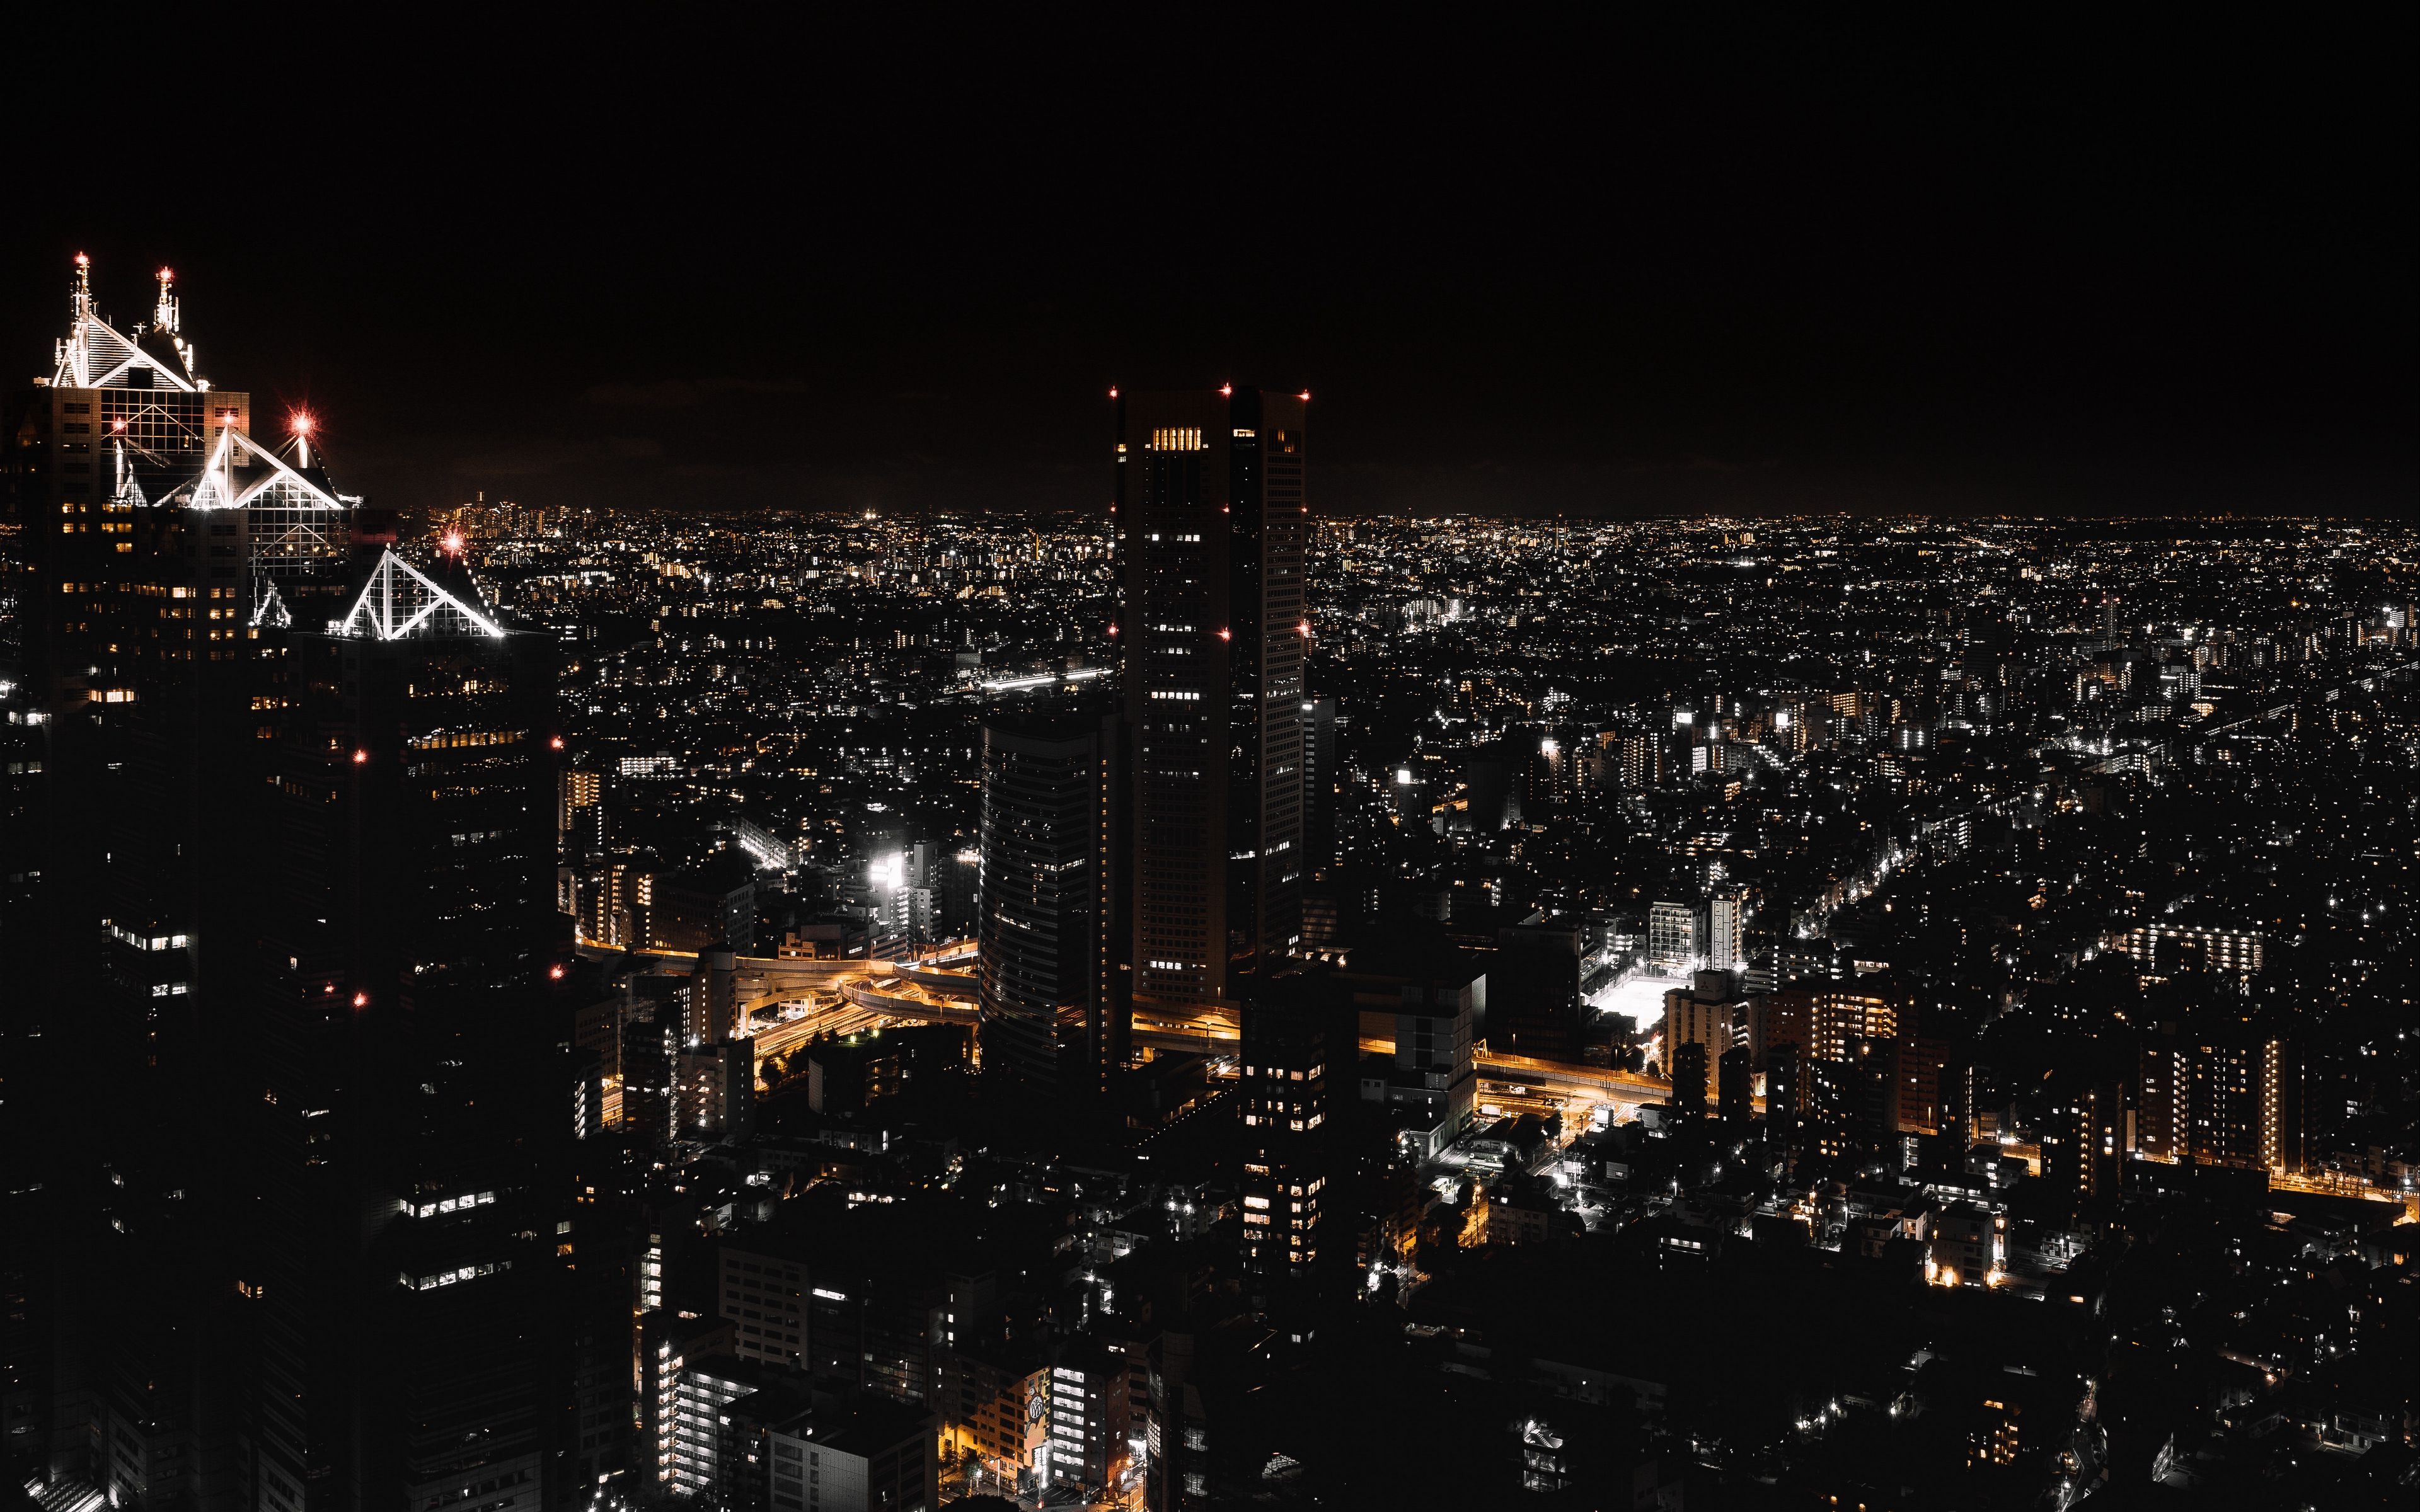 Download wallpaper 3840x2400 night city, view from above, city